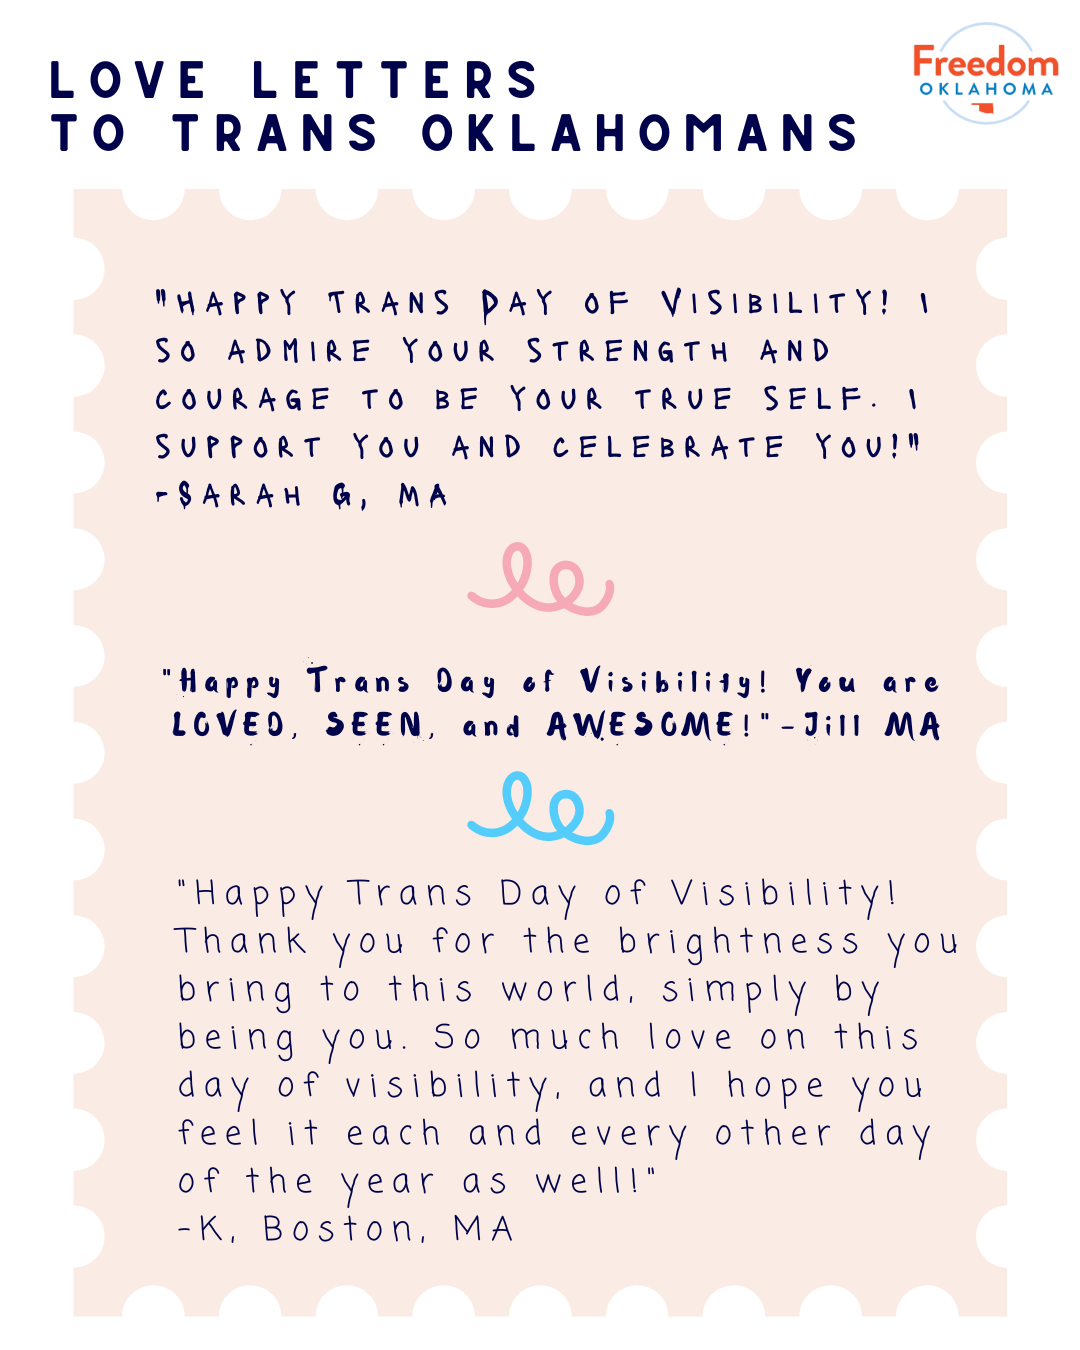  "Love Letters to Trans Oklahomans" on a white background. A graphic of a beige stamp takes up most of the graphic with the text of 3 love letters. #1: "Happy Trans Day of Visibility! I so admire your strength and courage to be your true self. I supp